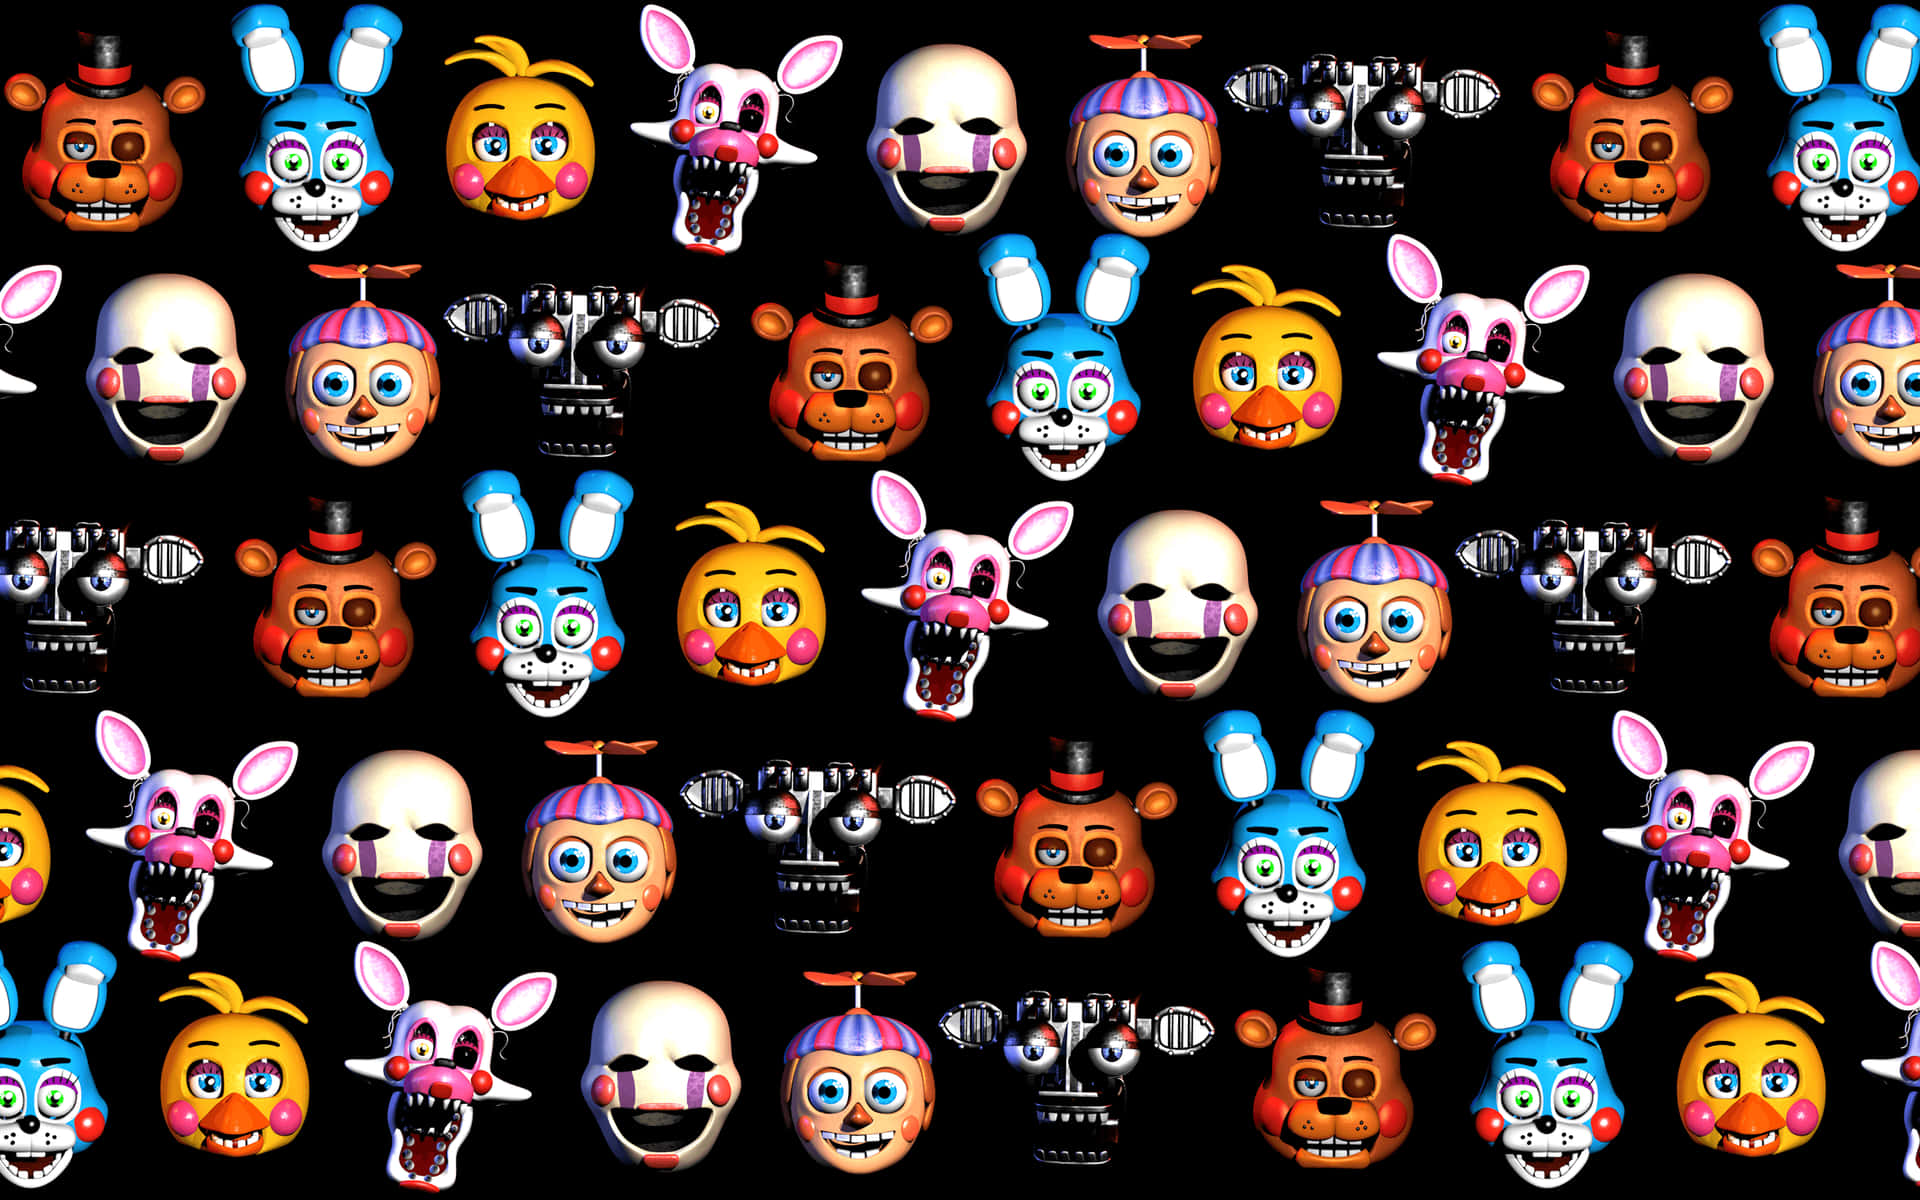 "Join The Fun Of FNAF!"